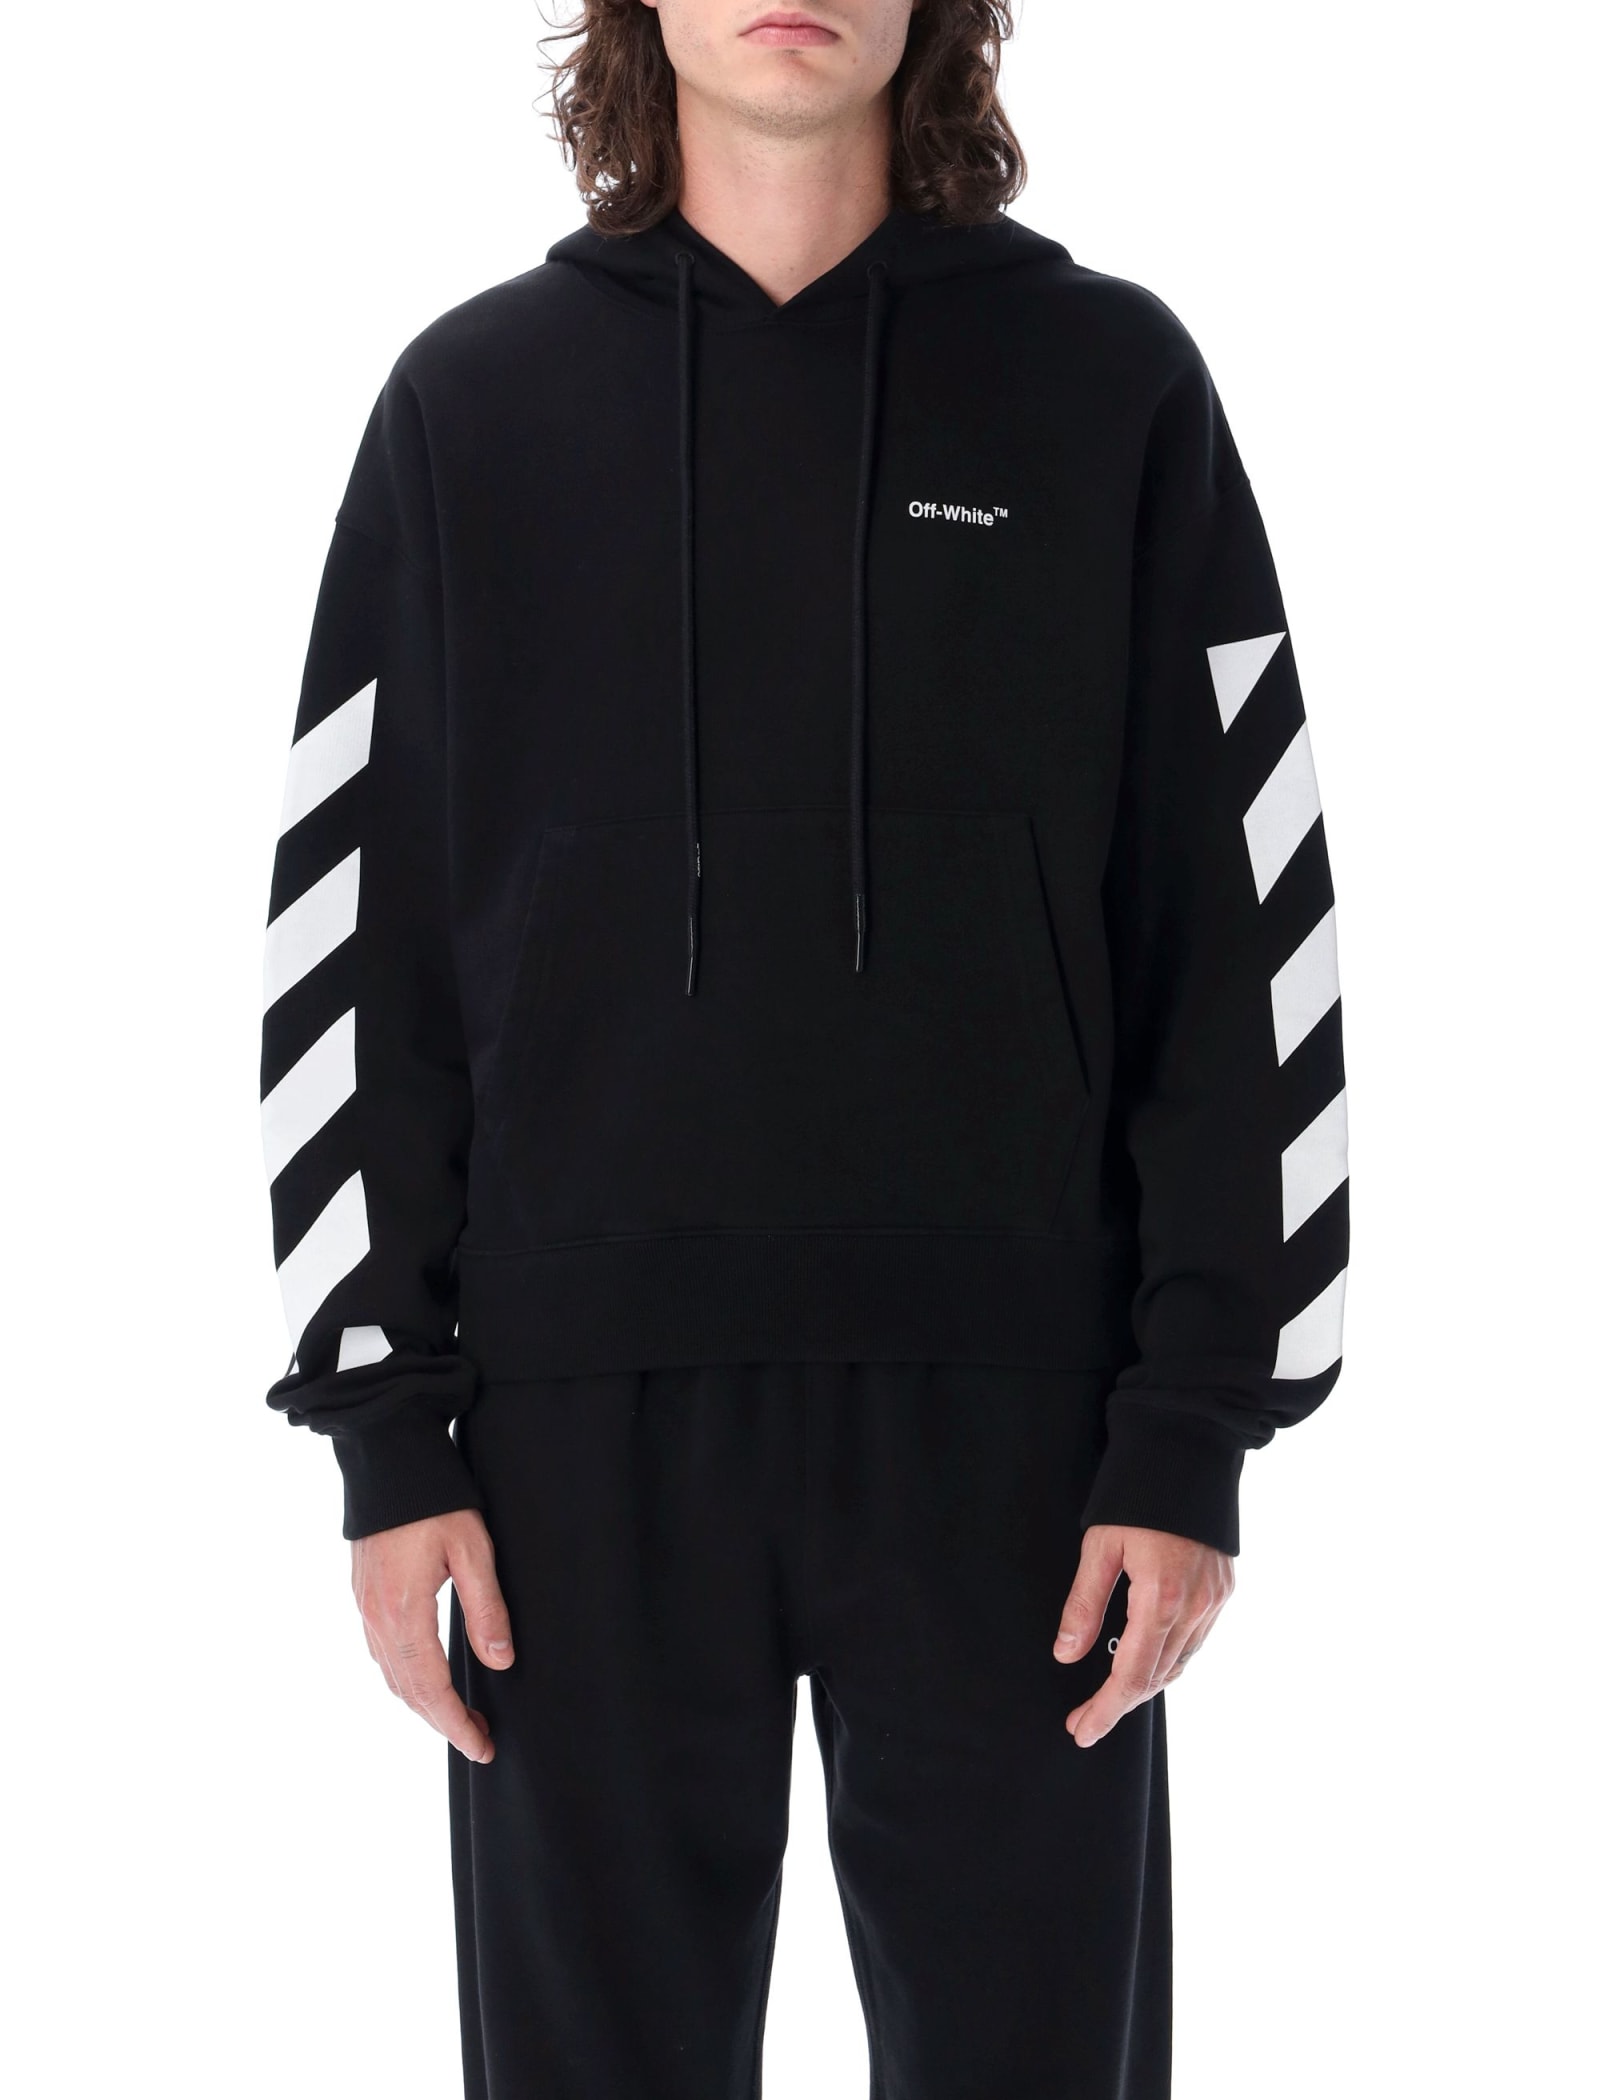 OFF-WHITE DIAG HELVETICA OVER HOODIE